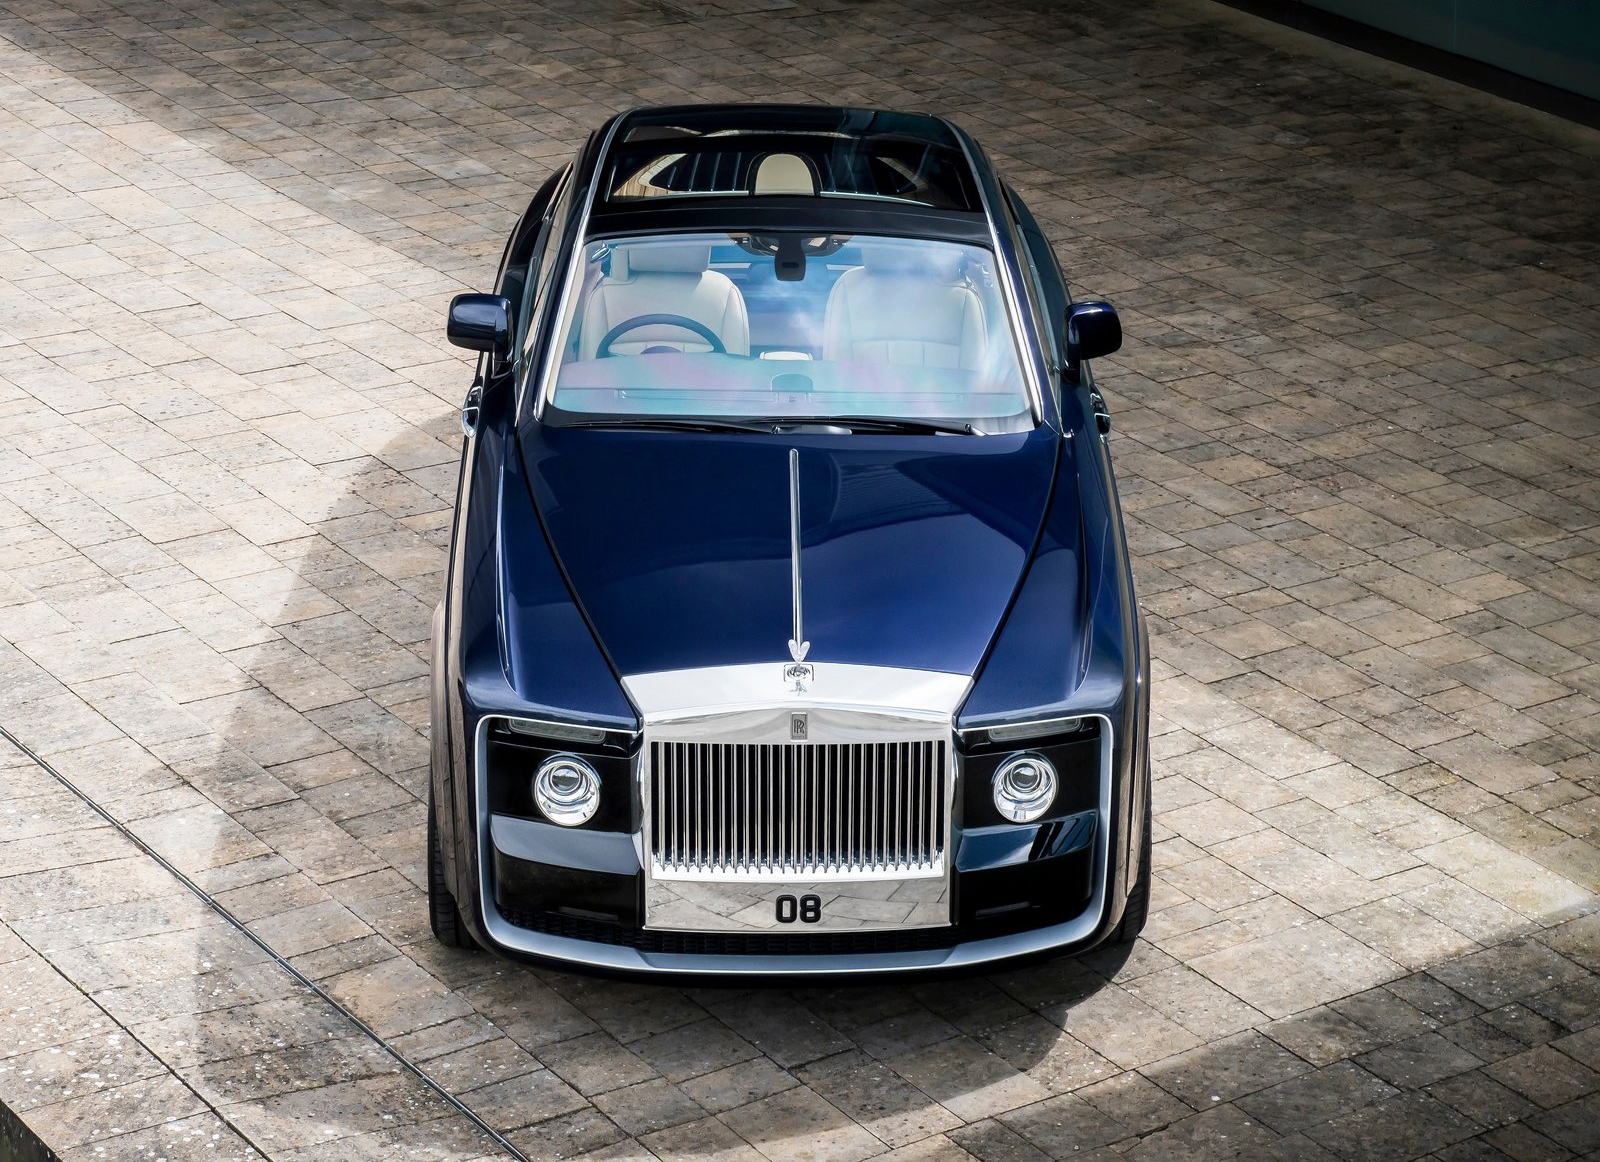 Rolls Royce Sweaptail front view